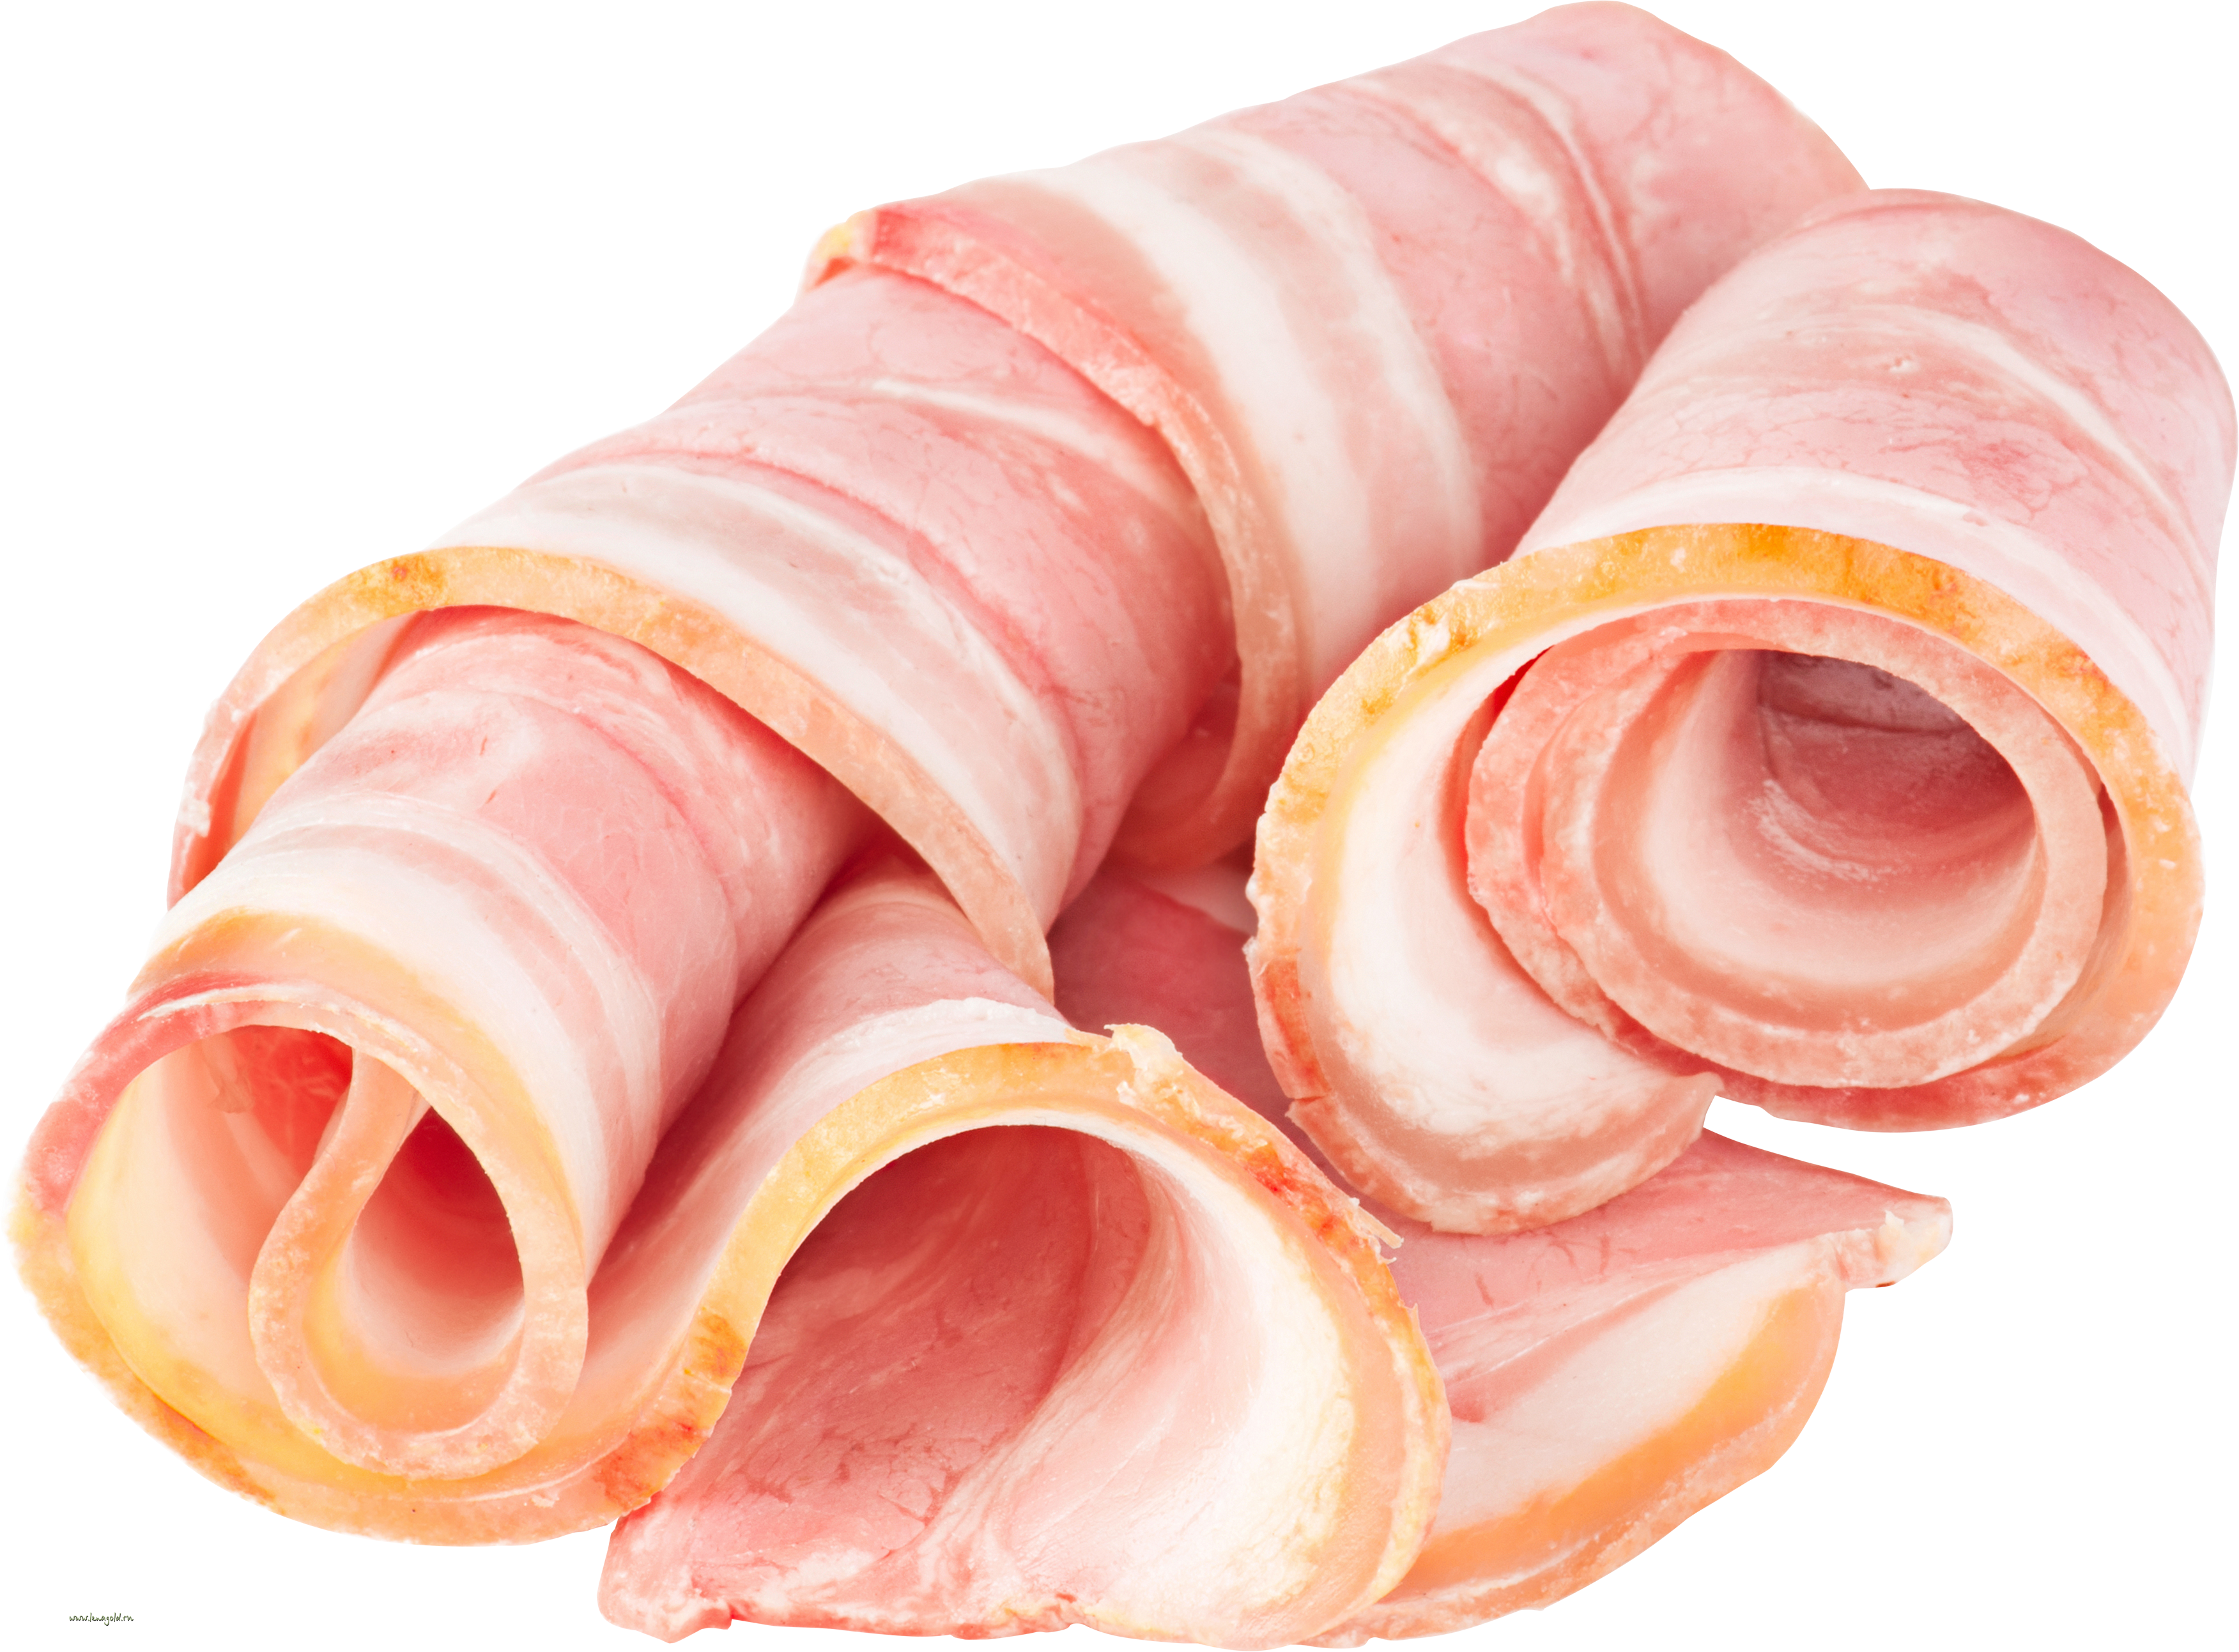 Rolled Slicesof Raw Bacon